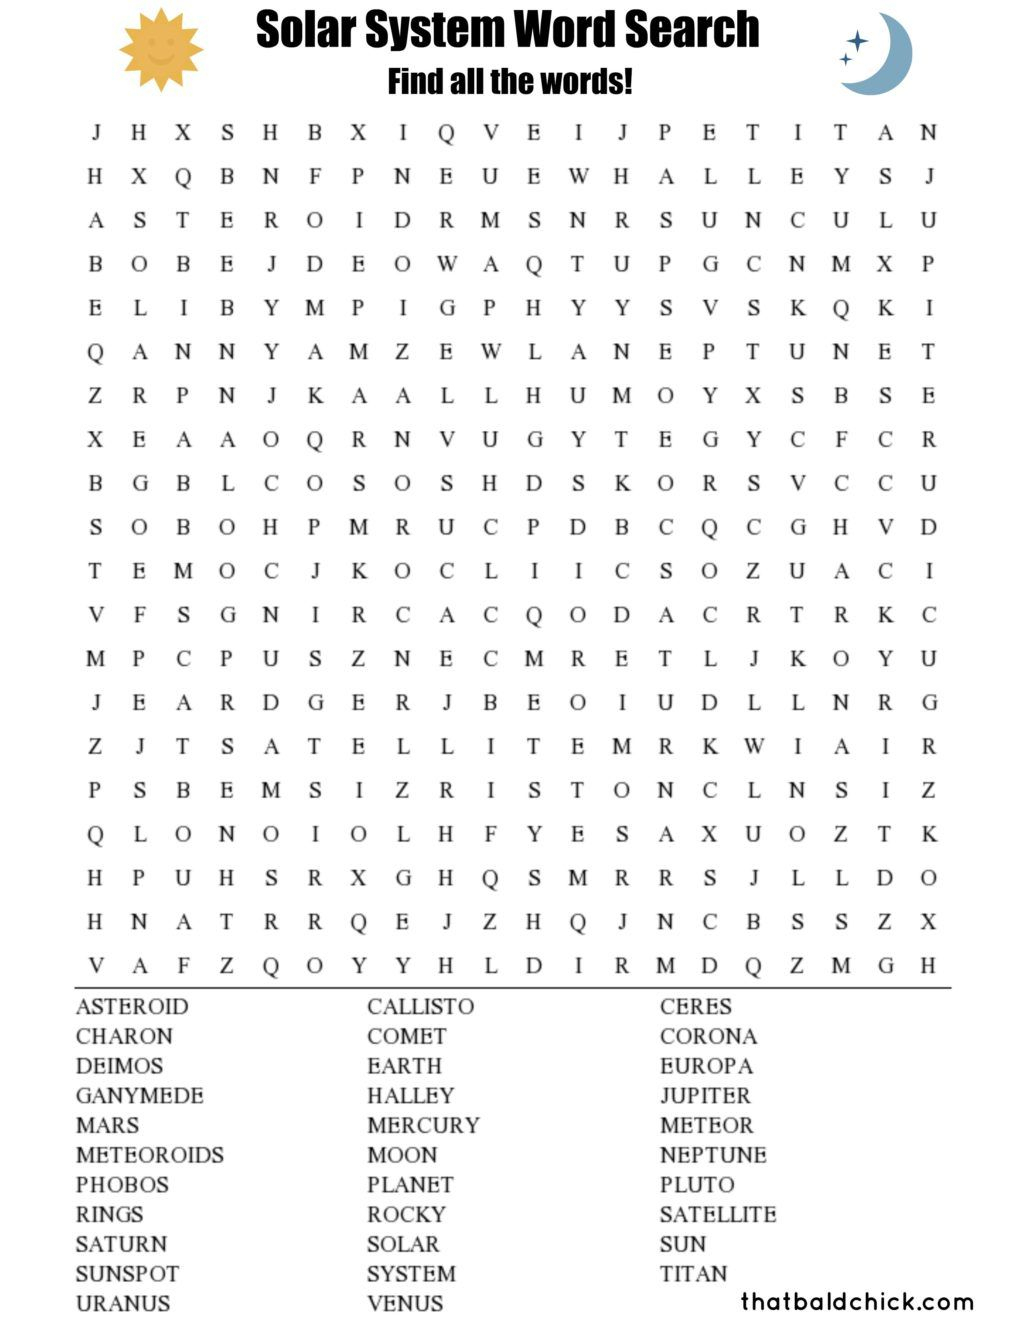 Solar System Word Search | Word Find, Solar System, Science